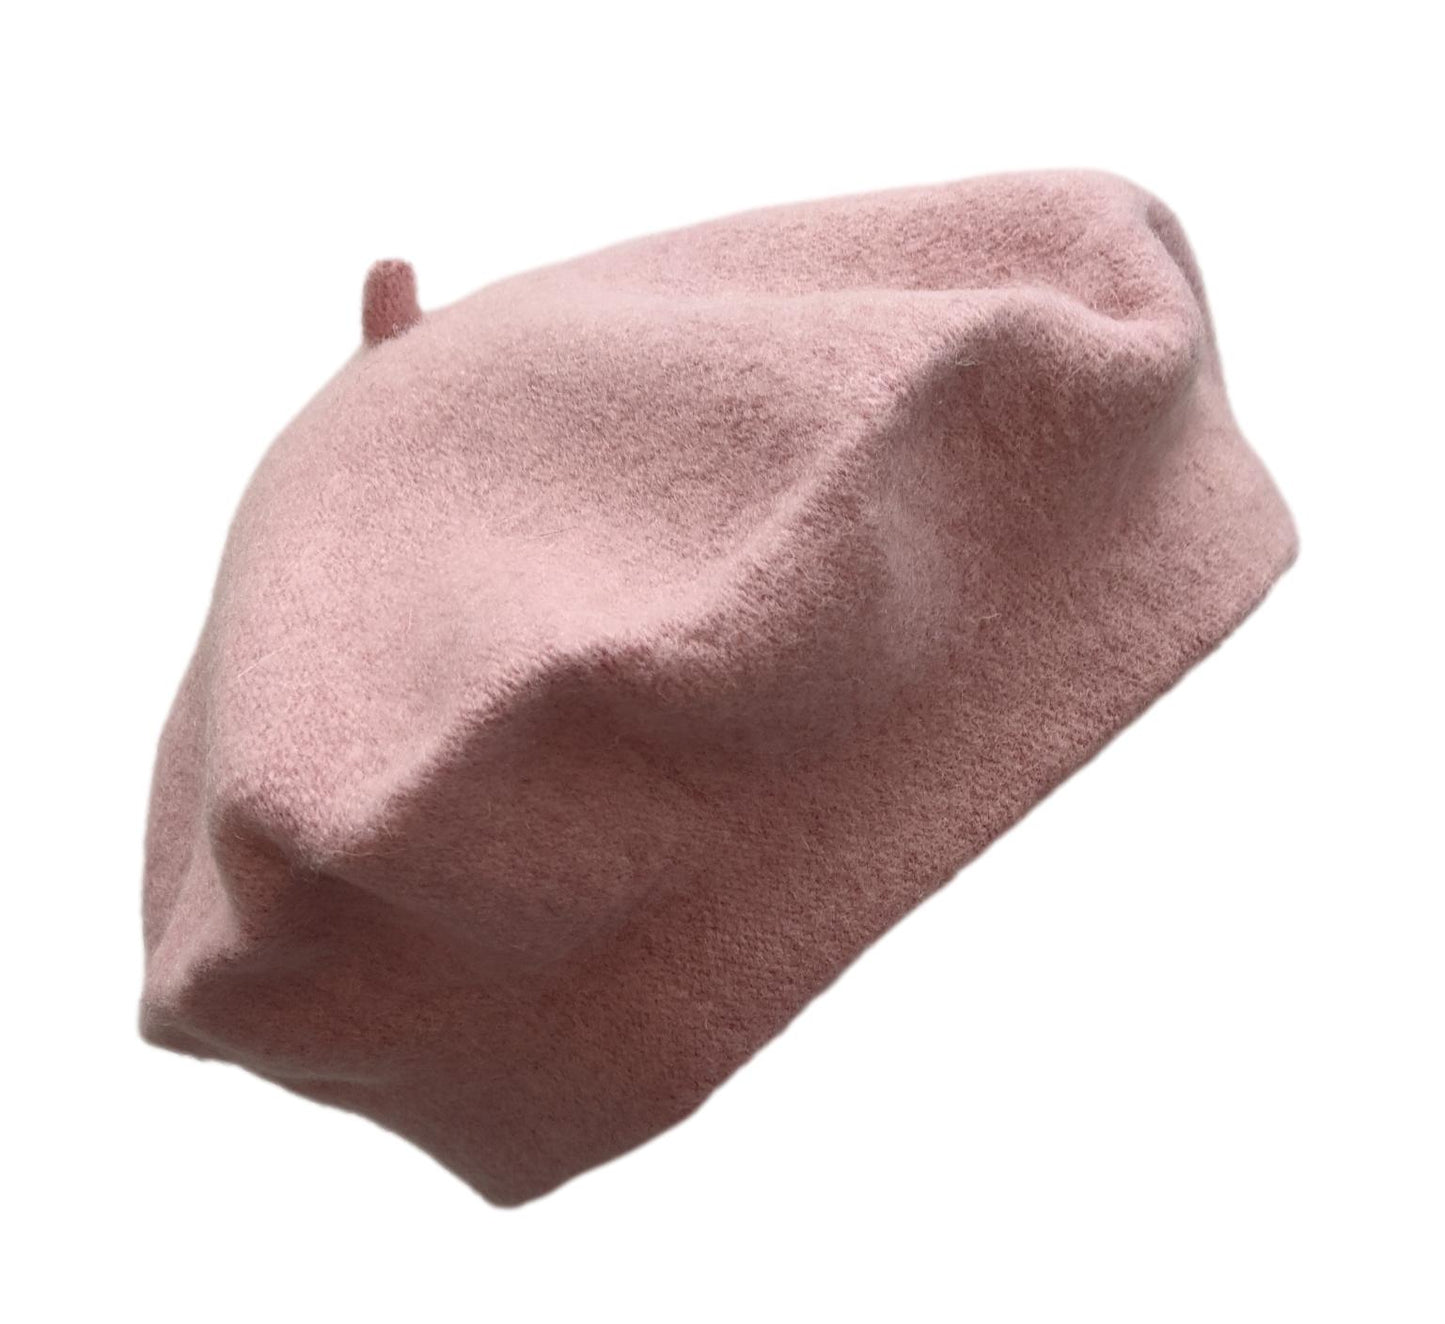 Beret - in Pink